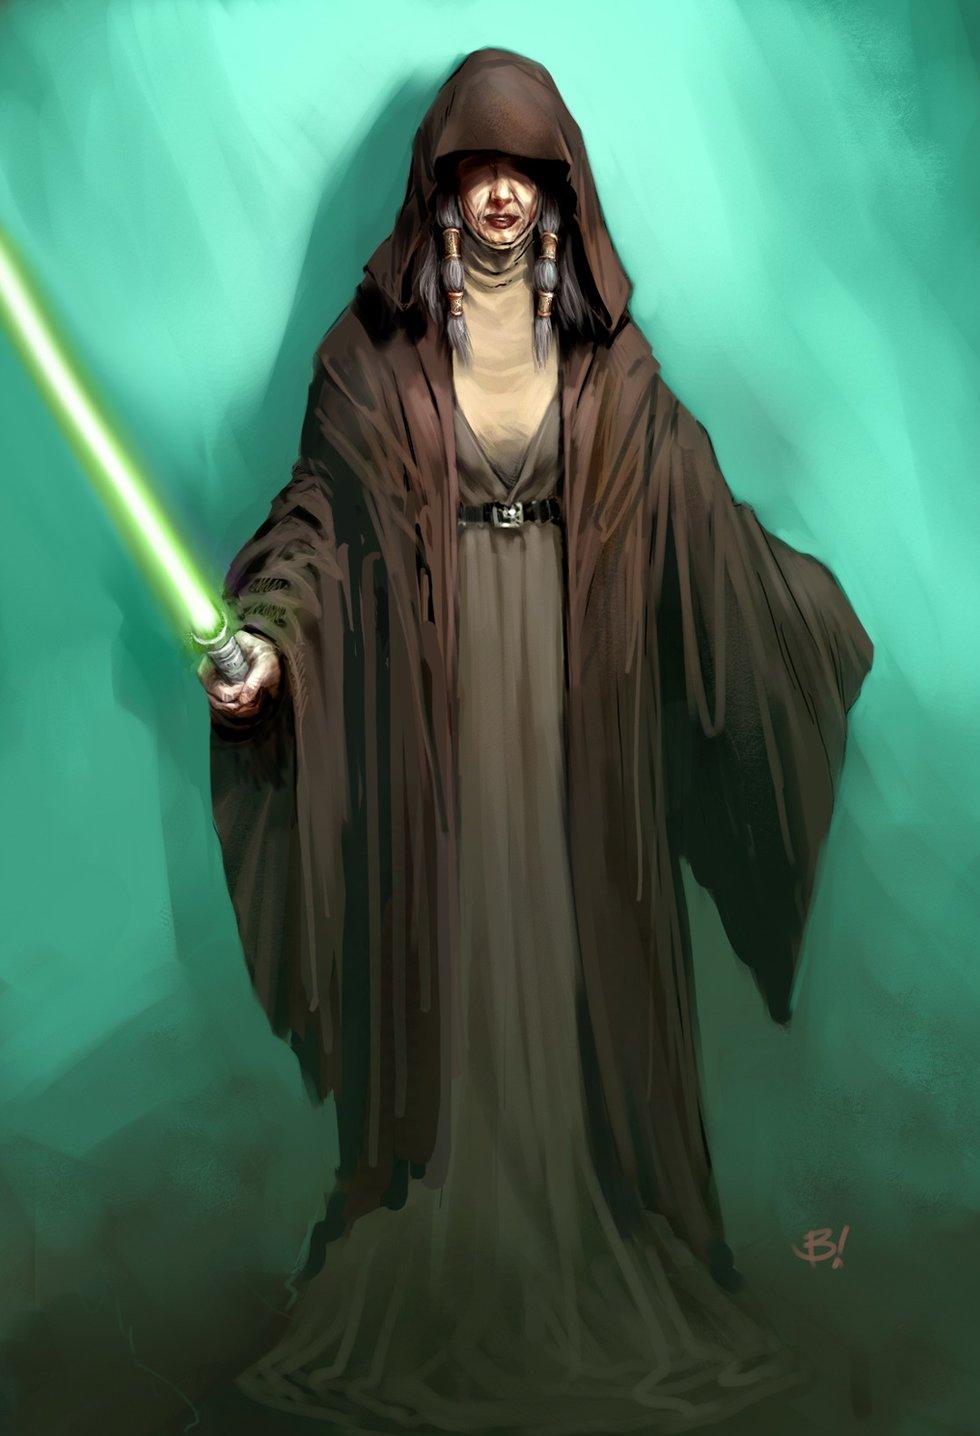 I use the Force as I would a poison, that in the hopes of understanding it, I may find a way to destroy it. But perhaps these are simply the excuses of an old woman who has come to rely on a thing she detests.